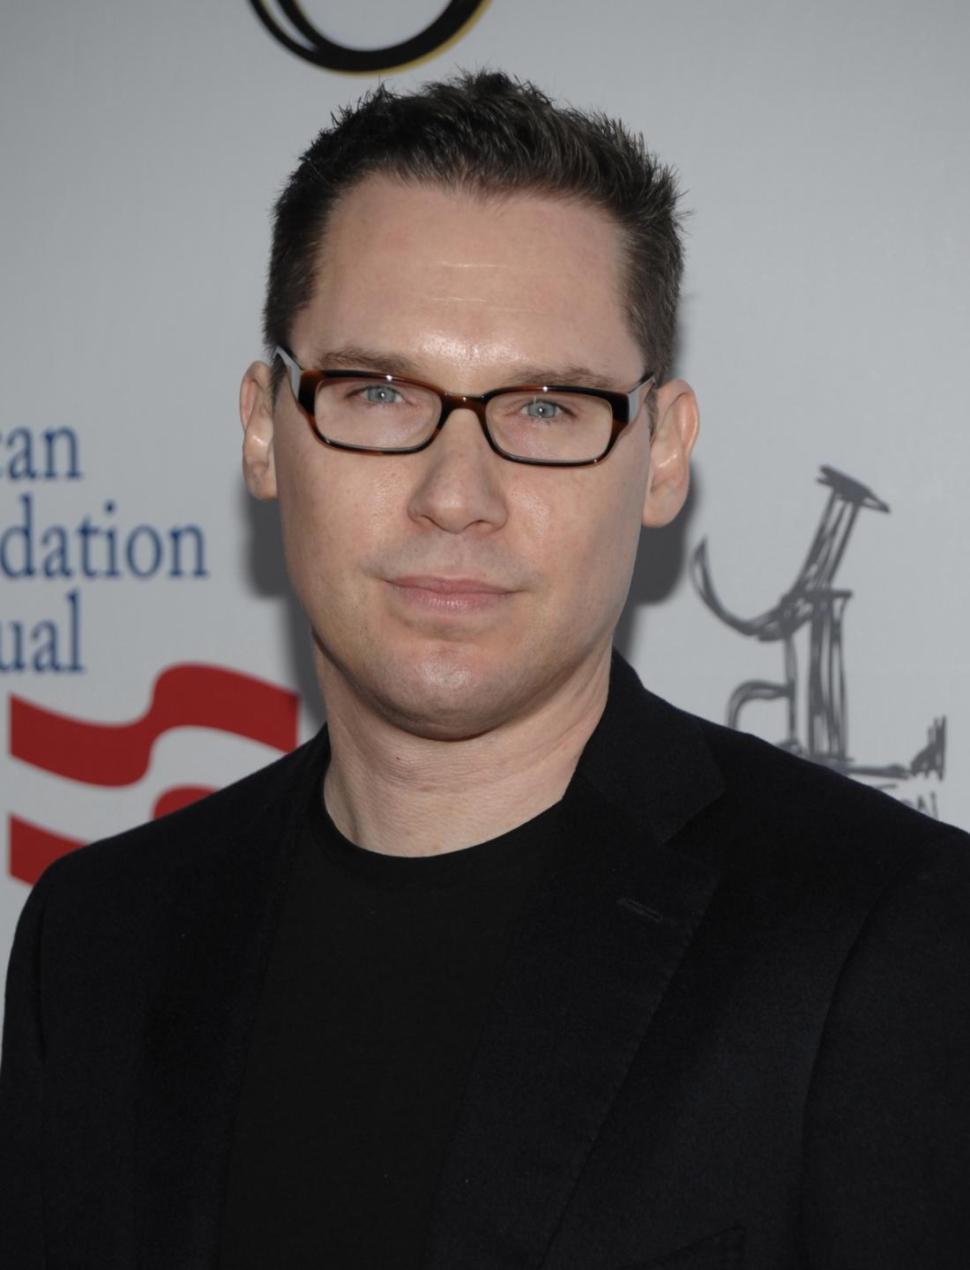 Bryan Singer denied the allegations but dropped out of the press tour for the latest installment of the ‘X-Men’ films he directed.